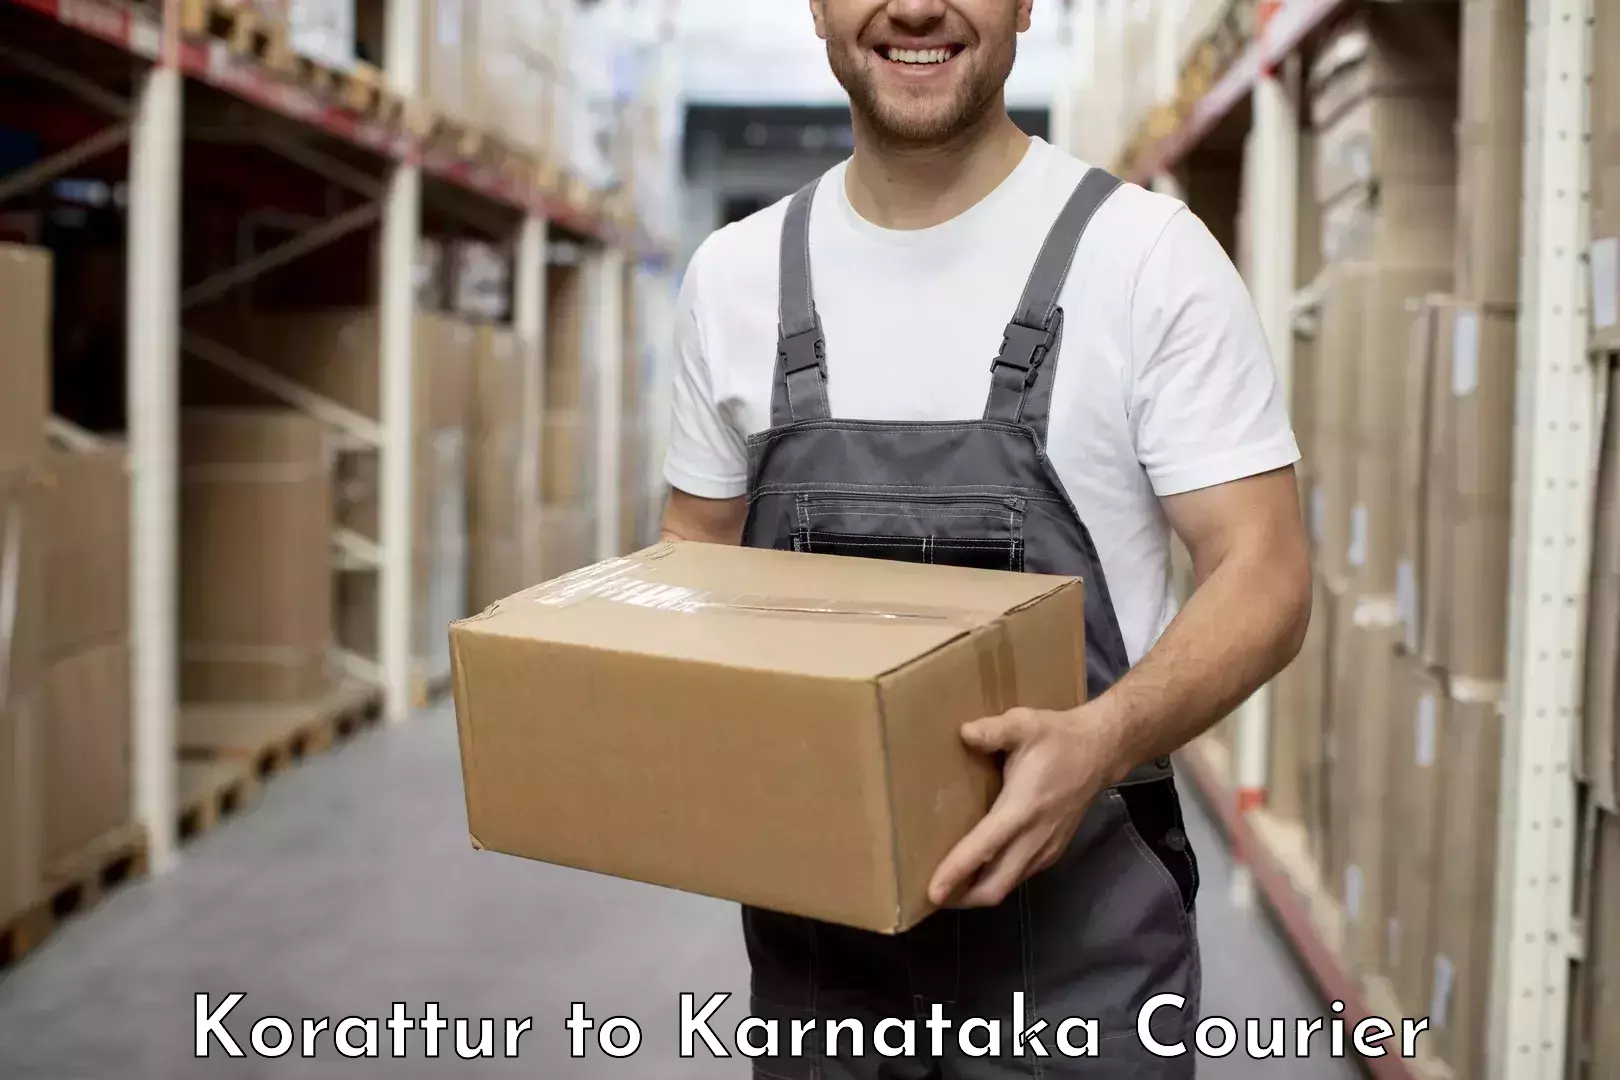 24/7 courier service Korattur to Mulbagal